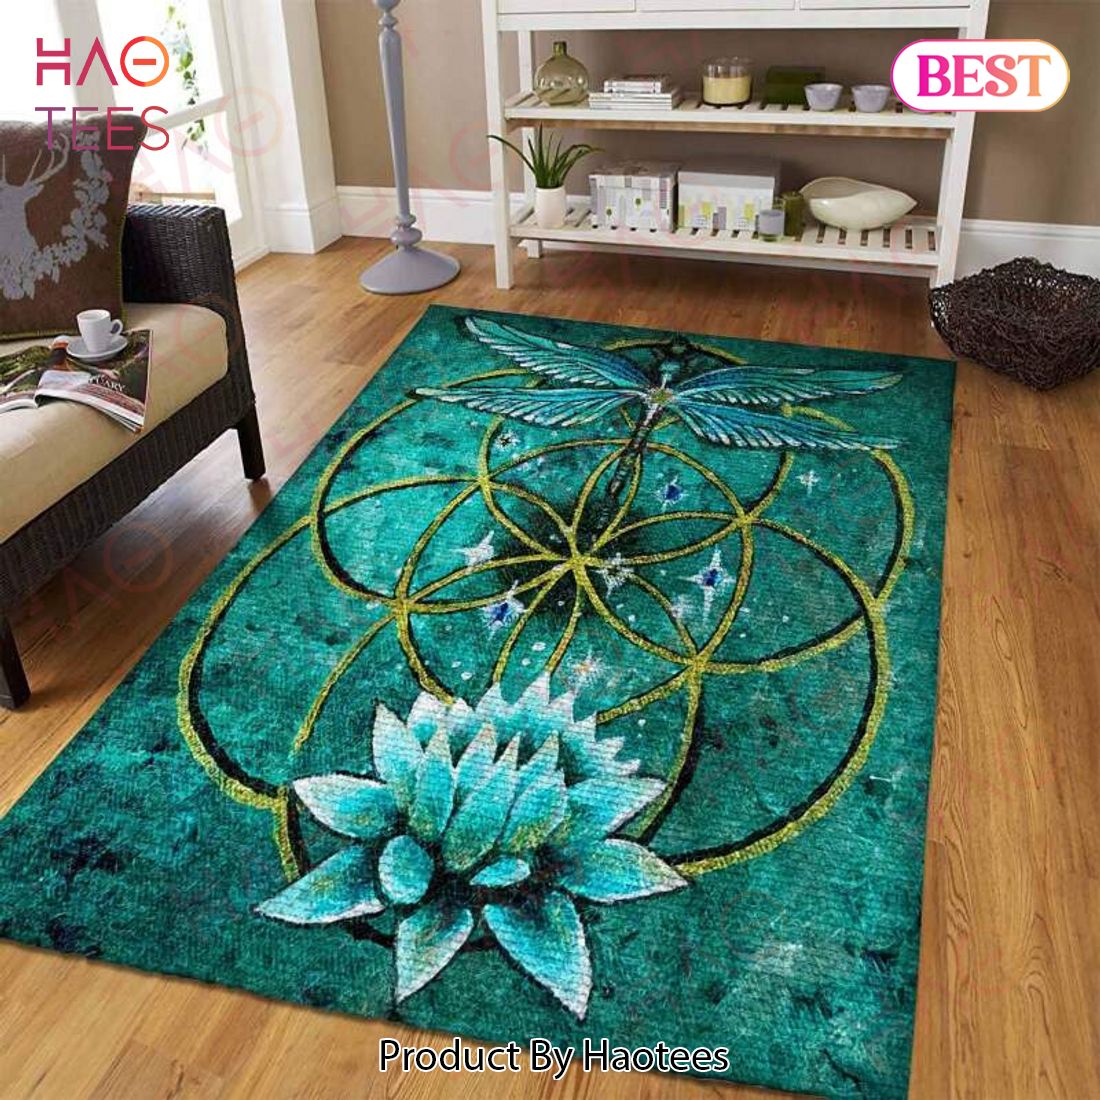 Dragonfly Limited Edition Area Rugs Carpet Mat Kitchen Rugs Floor Decor - FY11